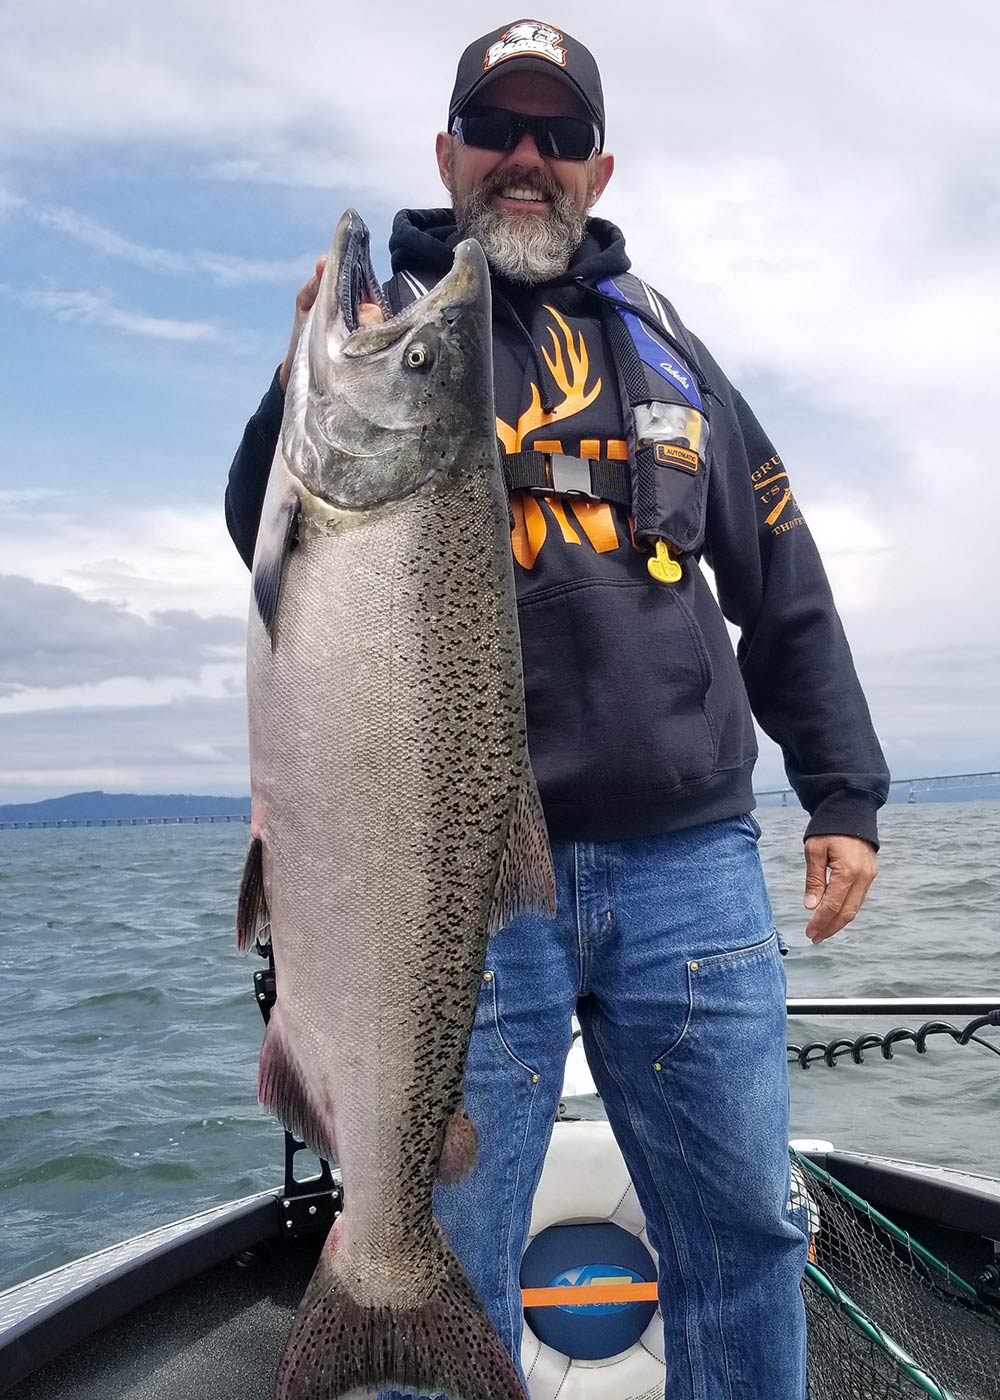 Columbia River Buoy 10: August 9, 2019